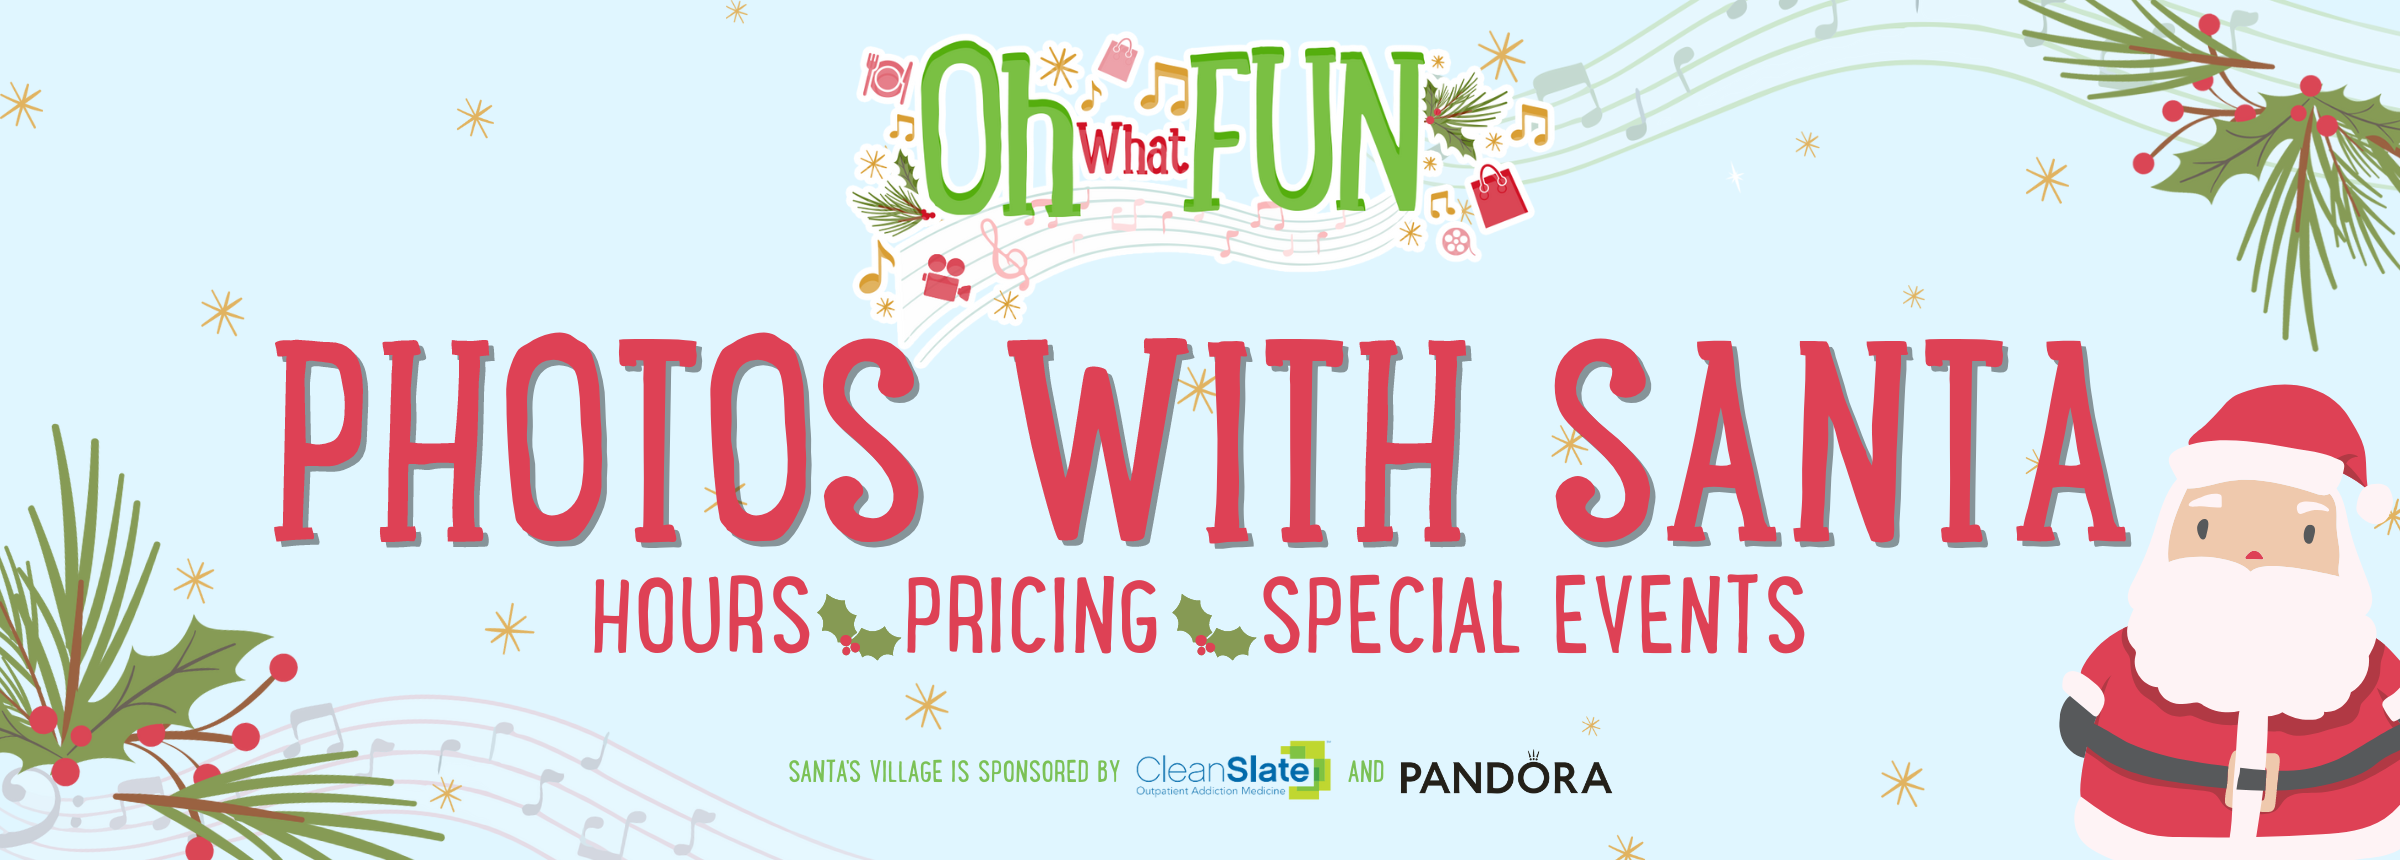 Photos with Santa: hours, pricing, special events